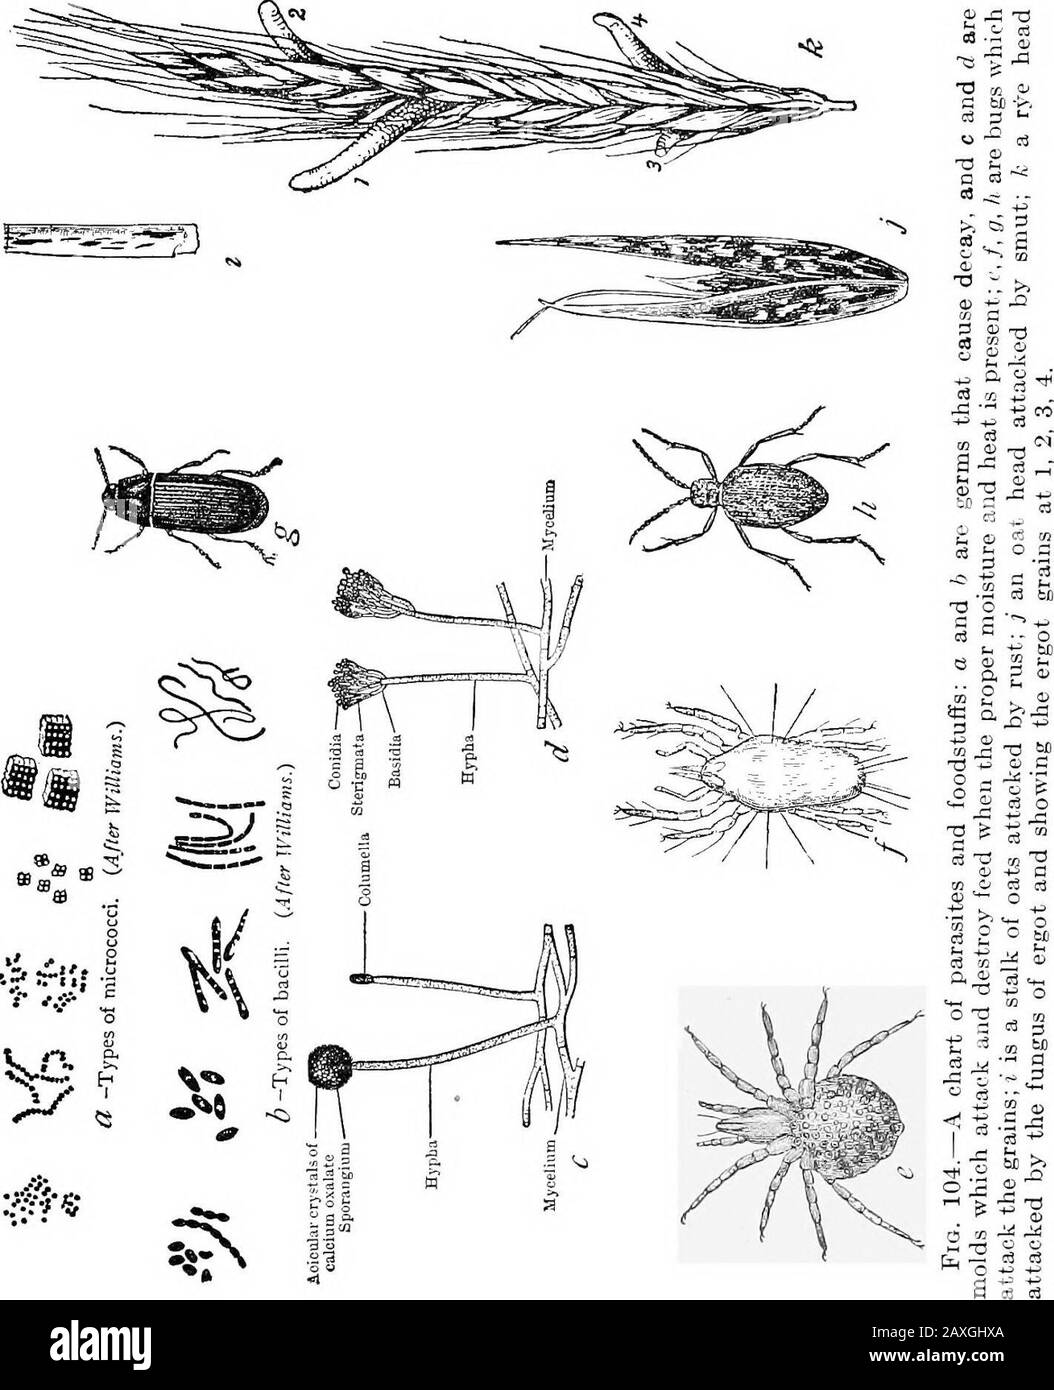 Poultry culture sanitation and hygiene . ue-grass and grains of rye. (See Fig. 104, k.)The grain becomes enlarged to twice or more in length, andvaries from a brown to black in color. The attacked grain isknown as an ergotized one. Grain and mash exposed to sufficient dampness becomemoldy. Figure 104, a, b, c, d, illustrates various kinds ofbacteria and molds, as stated before. The latter are made ofhyphse and spores. Damp graiji becomes dark in color and sprouts; the starch ischanged into sugar, and other chemical changes take place, be-sides some of the nutrients are used up by the mold. Fer Stock Photo